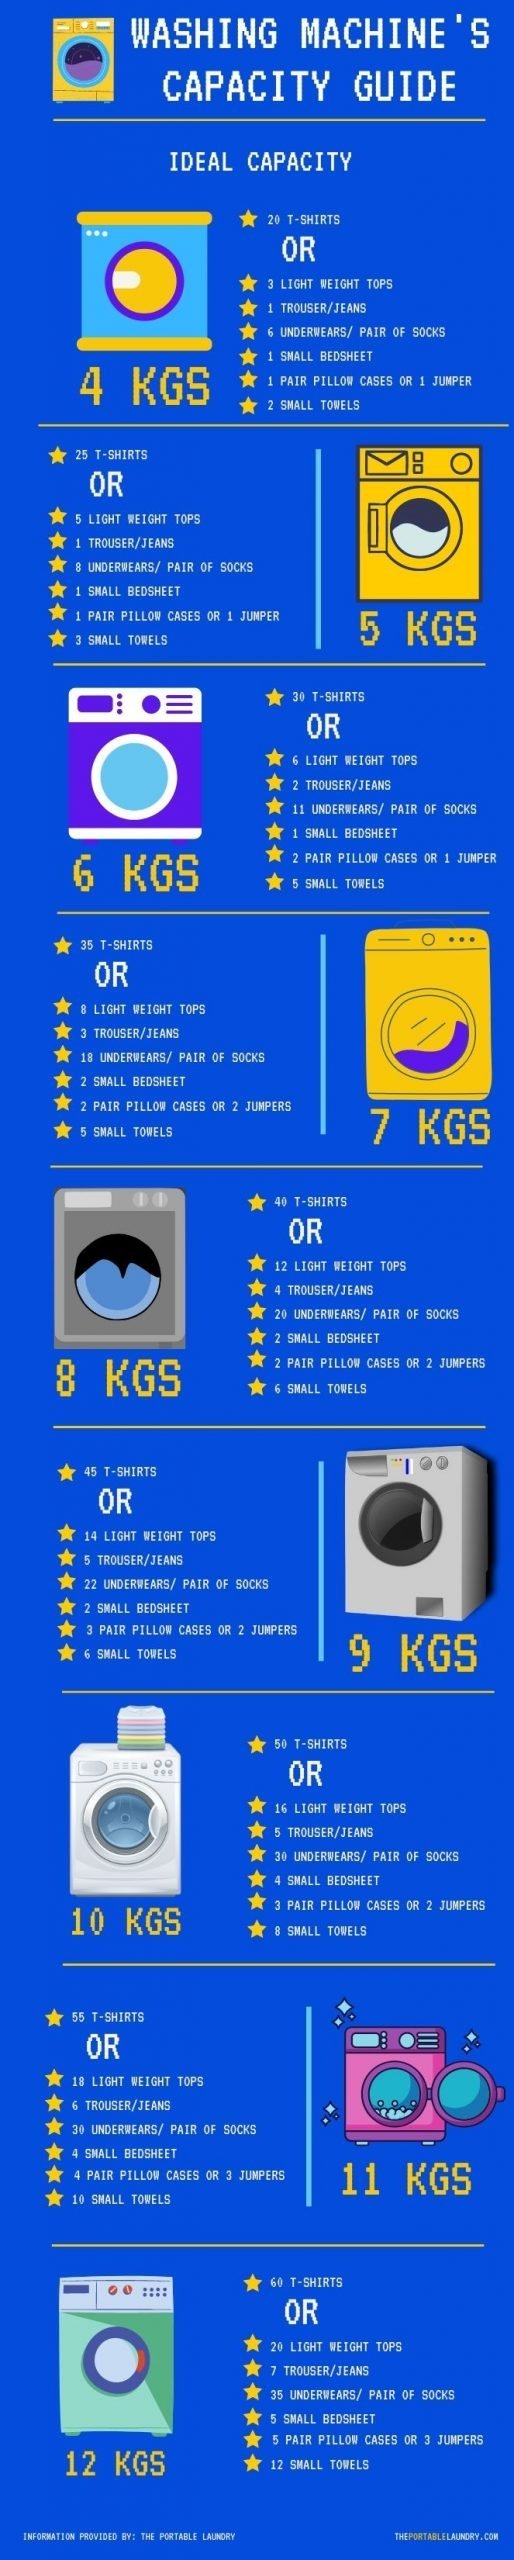 washing machine capacity and size guide